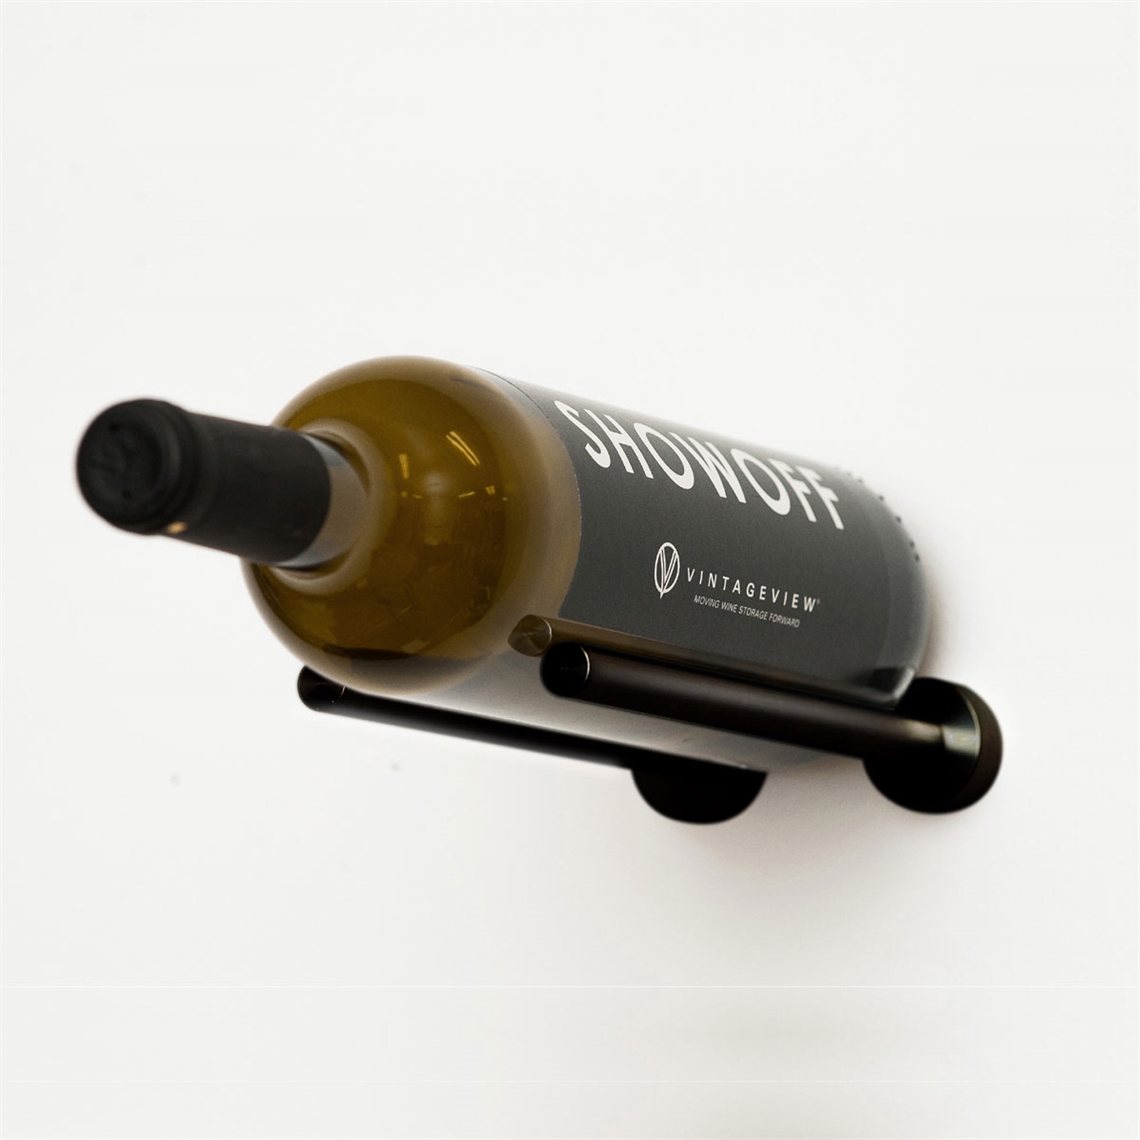 View more wooden wine rack buying guide from our Wall Mounted Wine Racks range